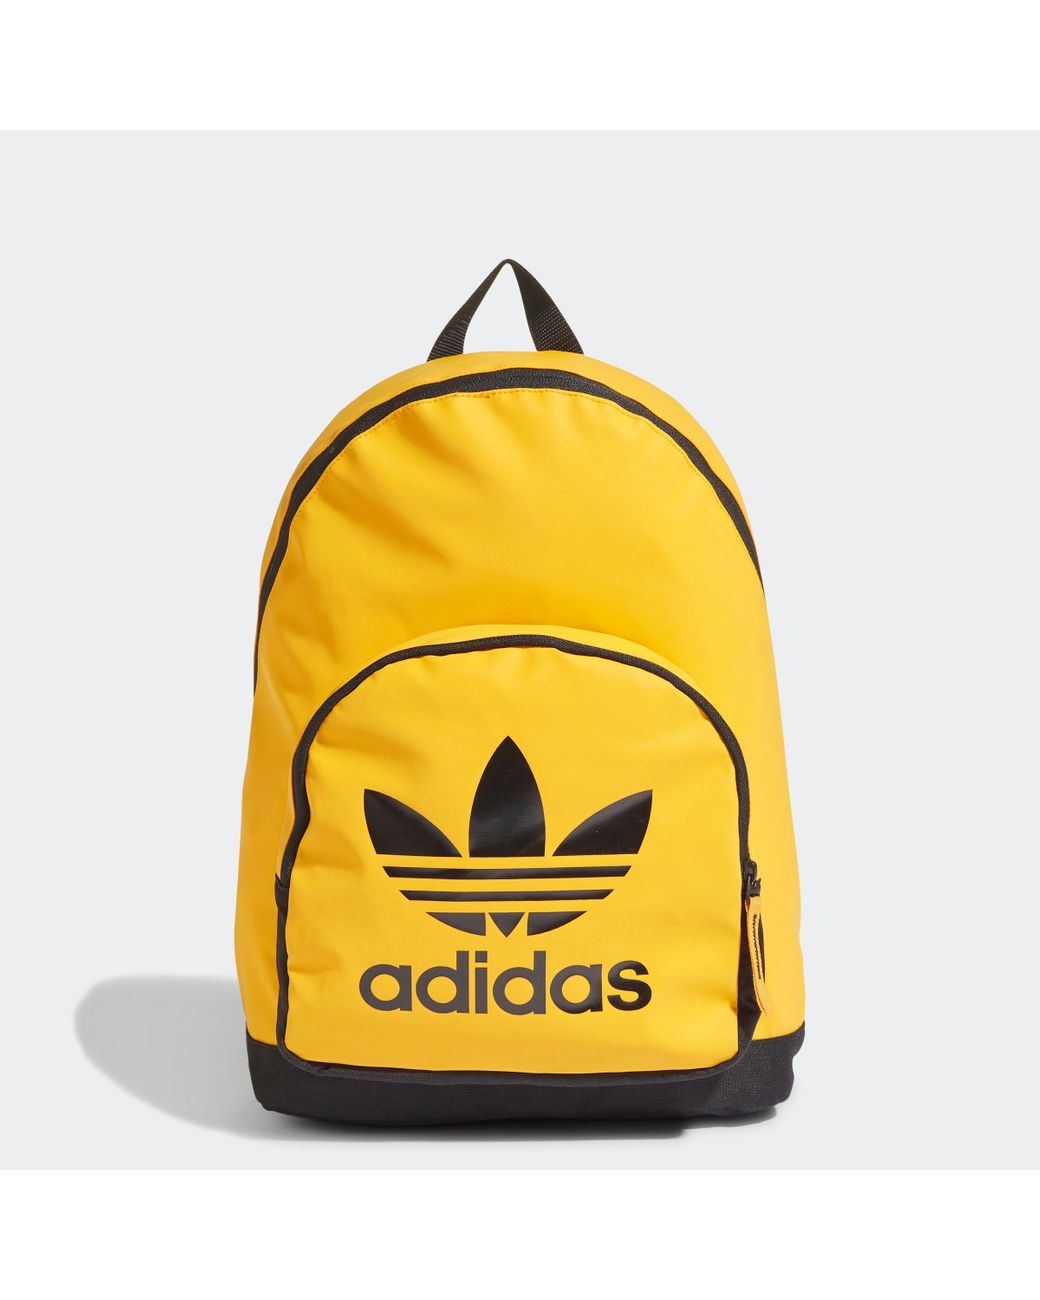 adidas Originals Adicolor Archive Backpack in Yellow for Men | Lyst